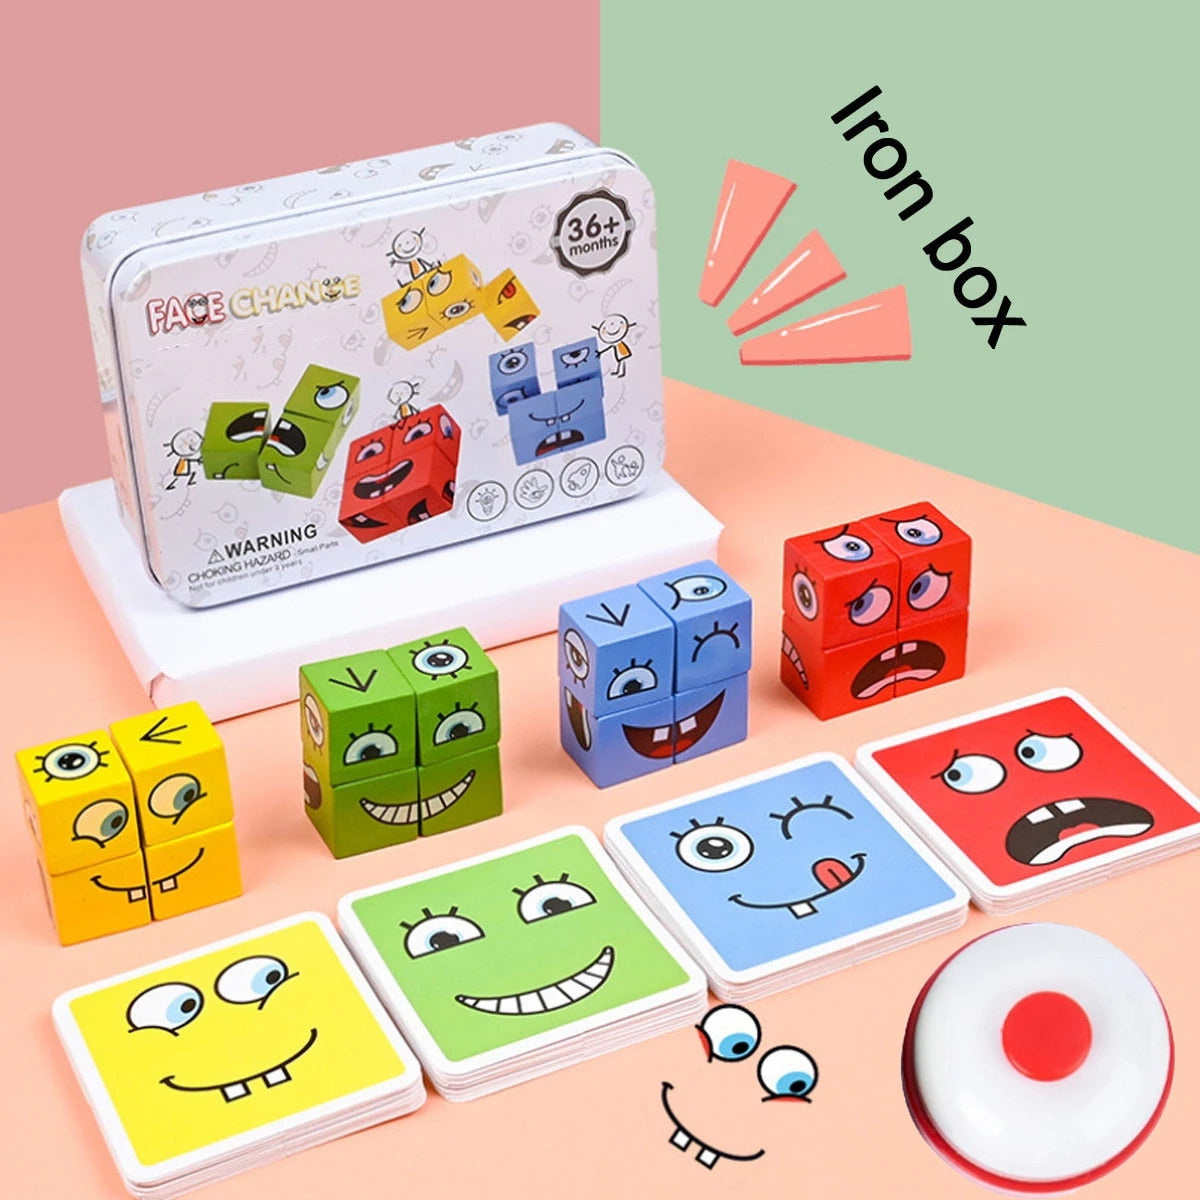 NEW Montessori Educational Wooden Materials Toys Early Learning Preschool Teaching Intelligence Match Puzzle Toy for Children